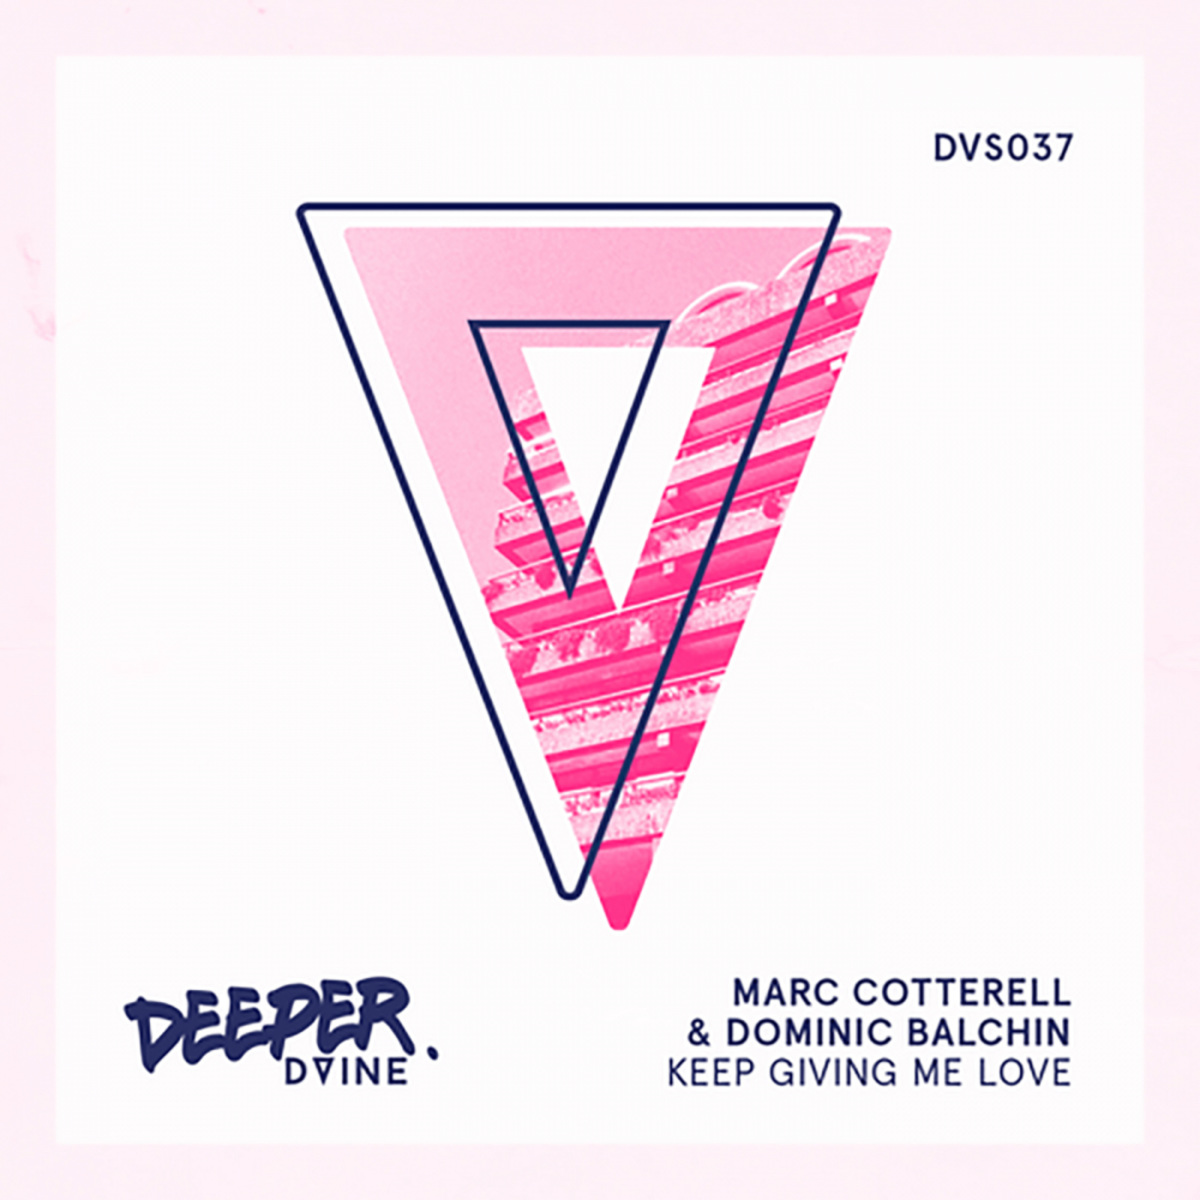 Marc Cotterell & Dominic Balchin - Keep Giving Me Love / Oh Yes! / D-Vine Sounds